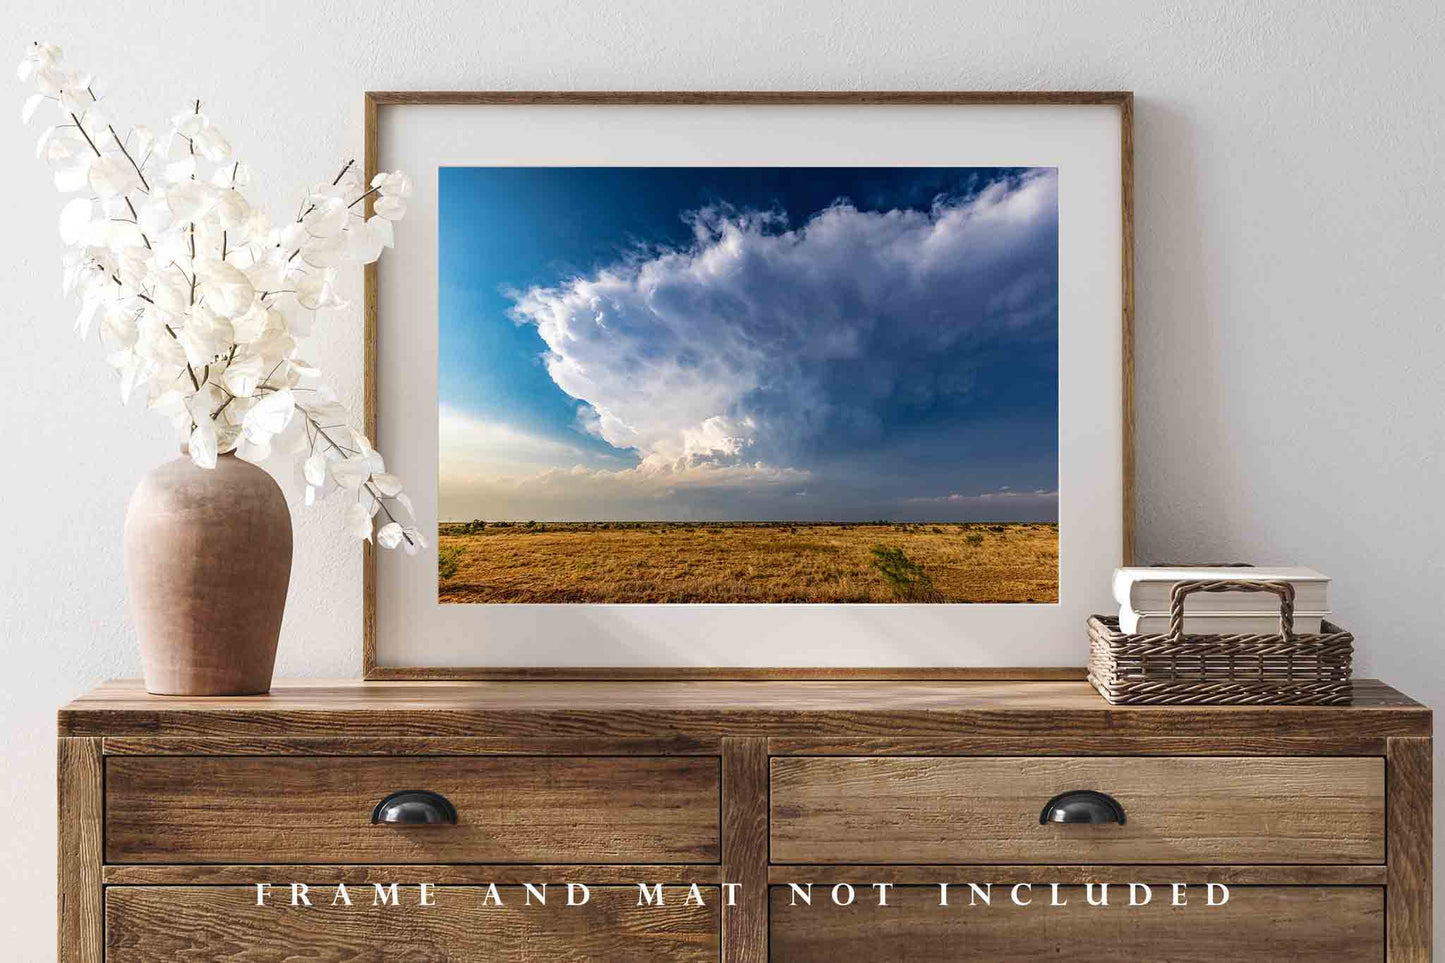 Storm Photo Print | Mesocyclone Picture | Texas Wall Art | Supercell Thunderstorm Photography | Nature Decor